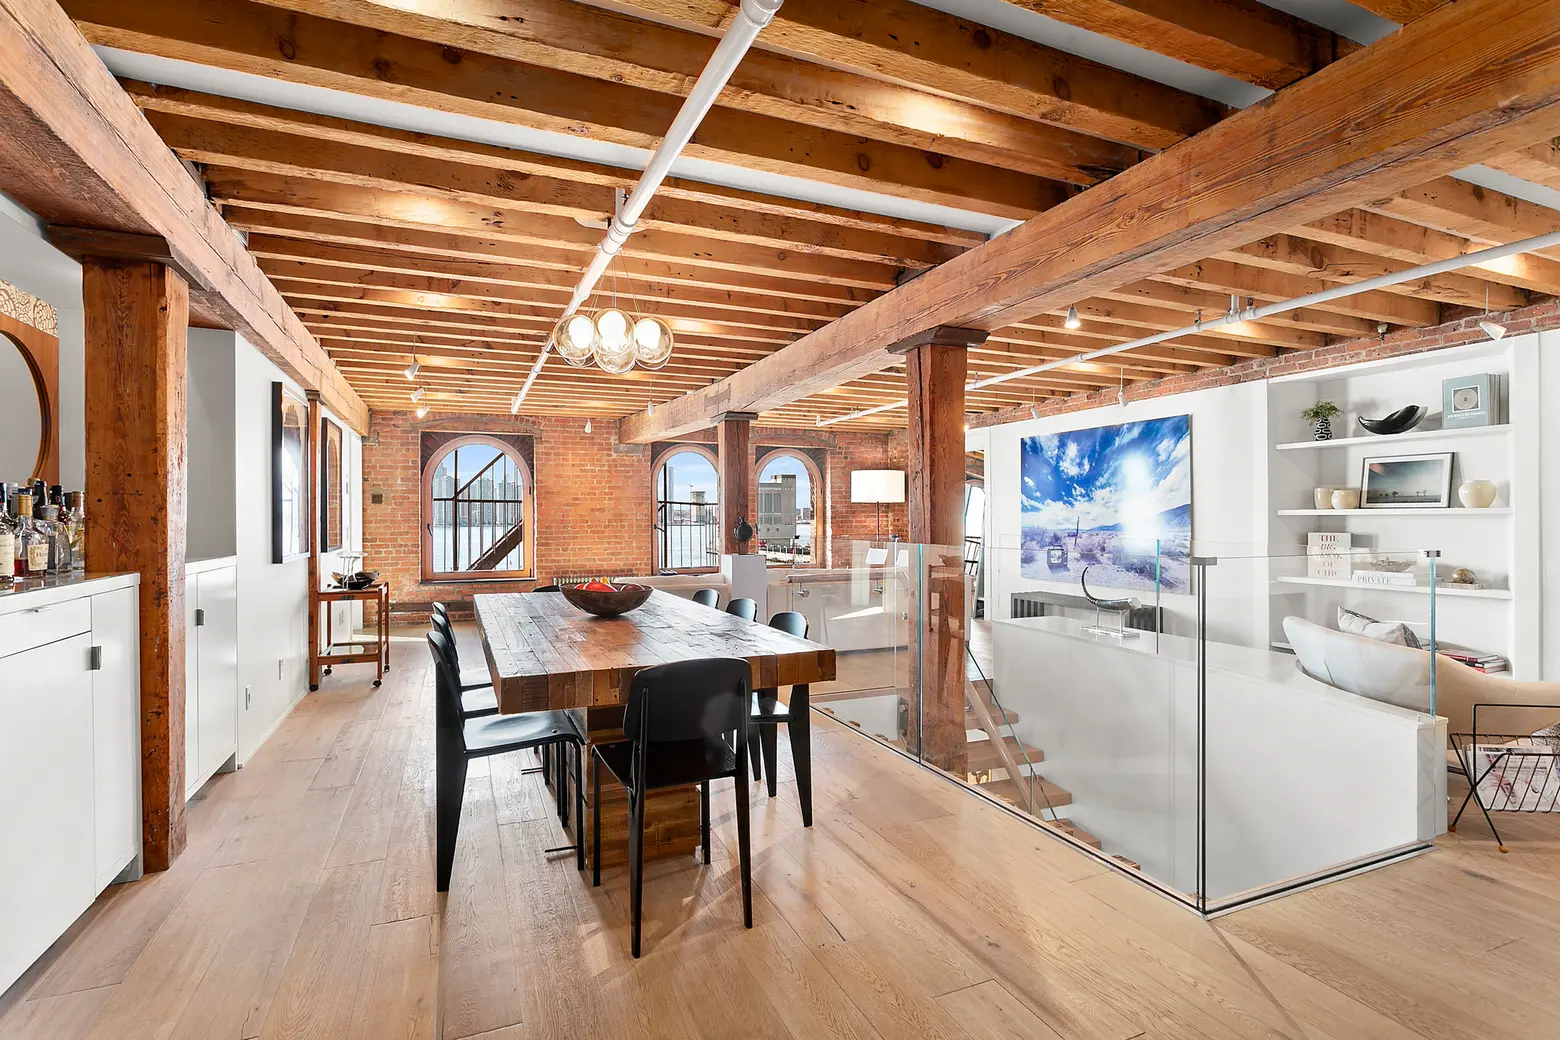 $5.7M Tribeca co-op is two floors of loft living with lots of bonus space